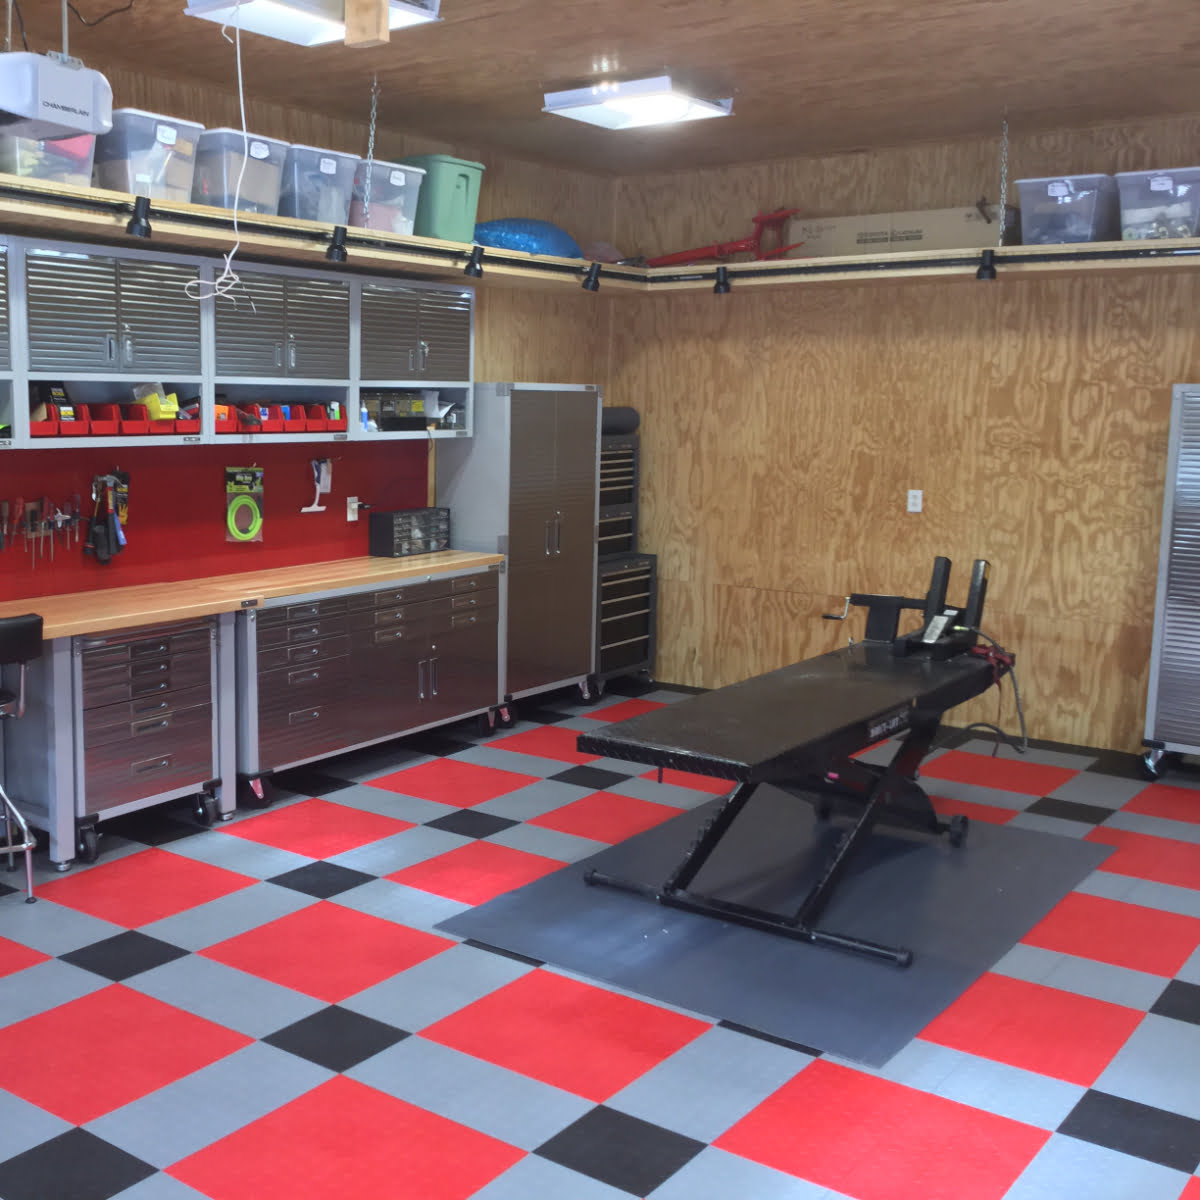 Garage/workshop re model using our Diamond black, gray and red tiles.